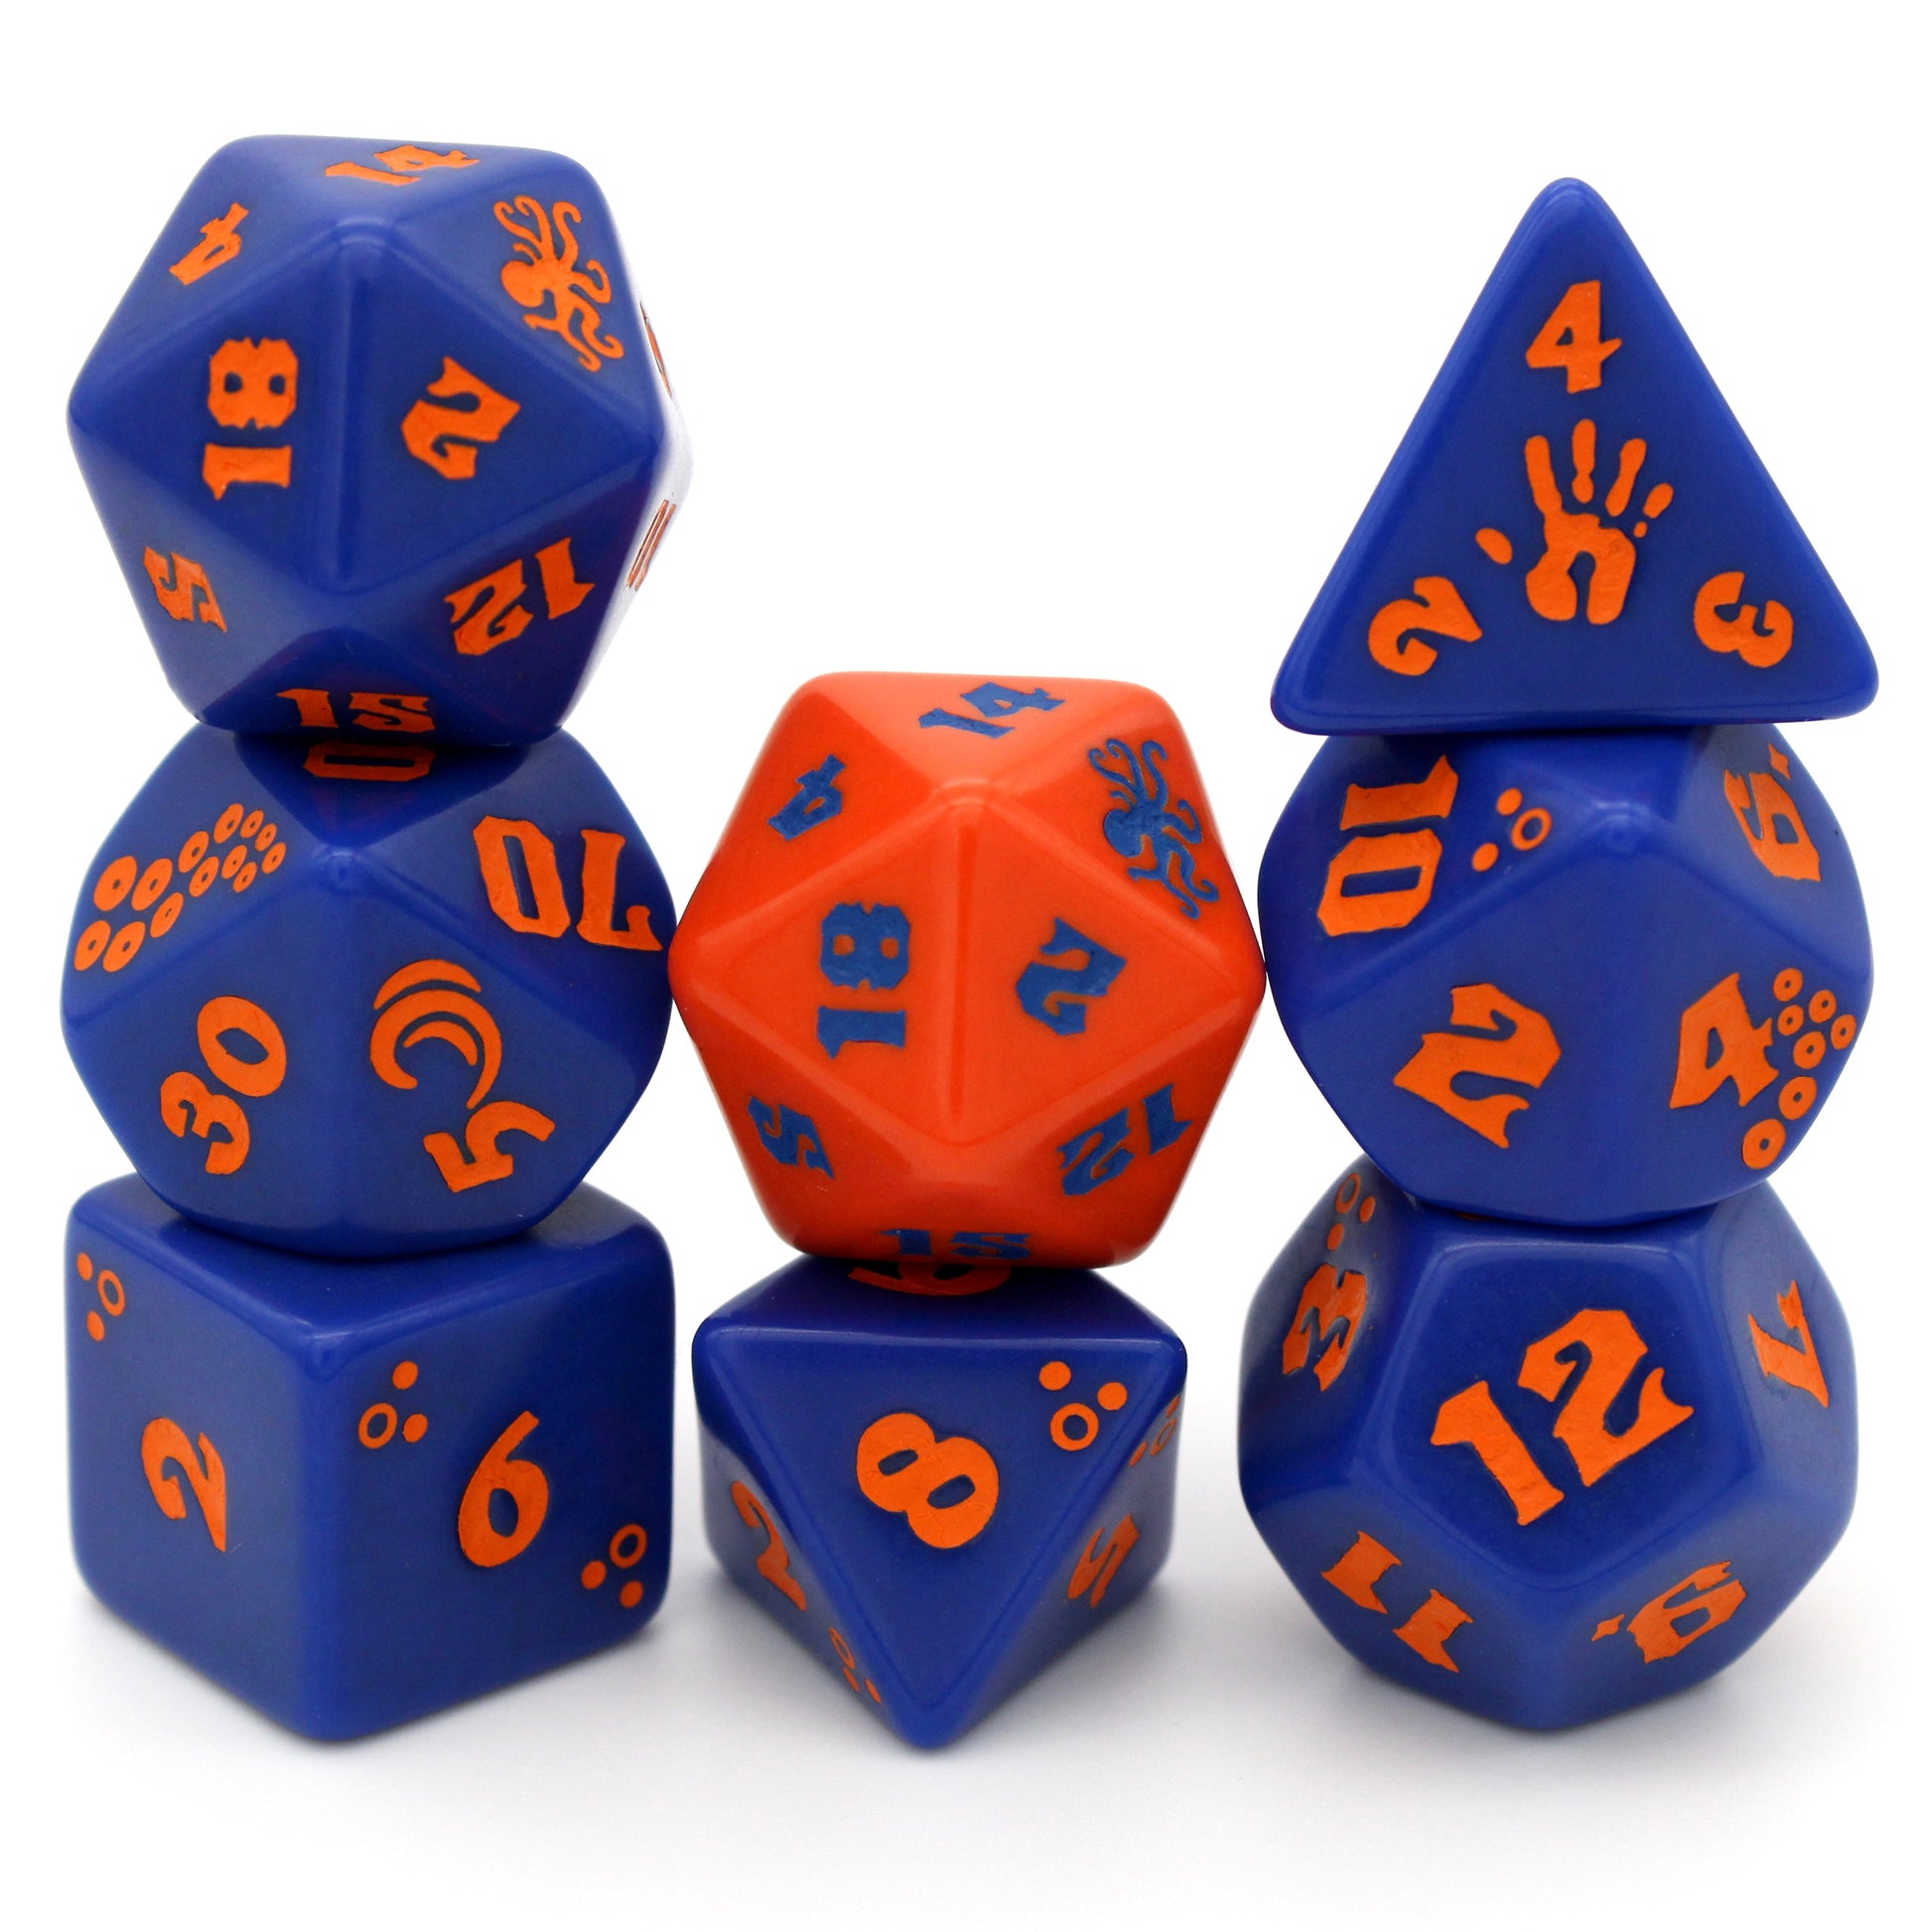 Cephalopod is an 8-piece engraved acrylic set in blue lagoon with octopus transformation icons inked in coral orange. Included is an alternate d20 in reverse colors.